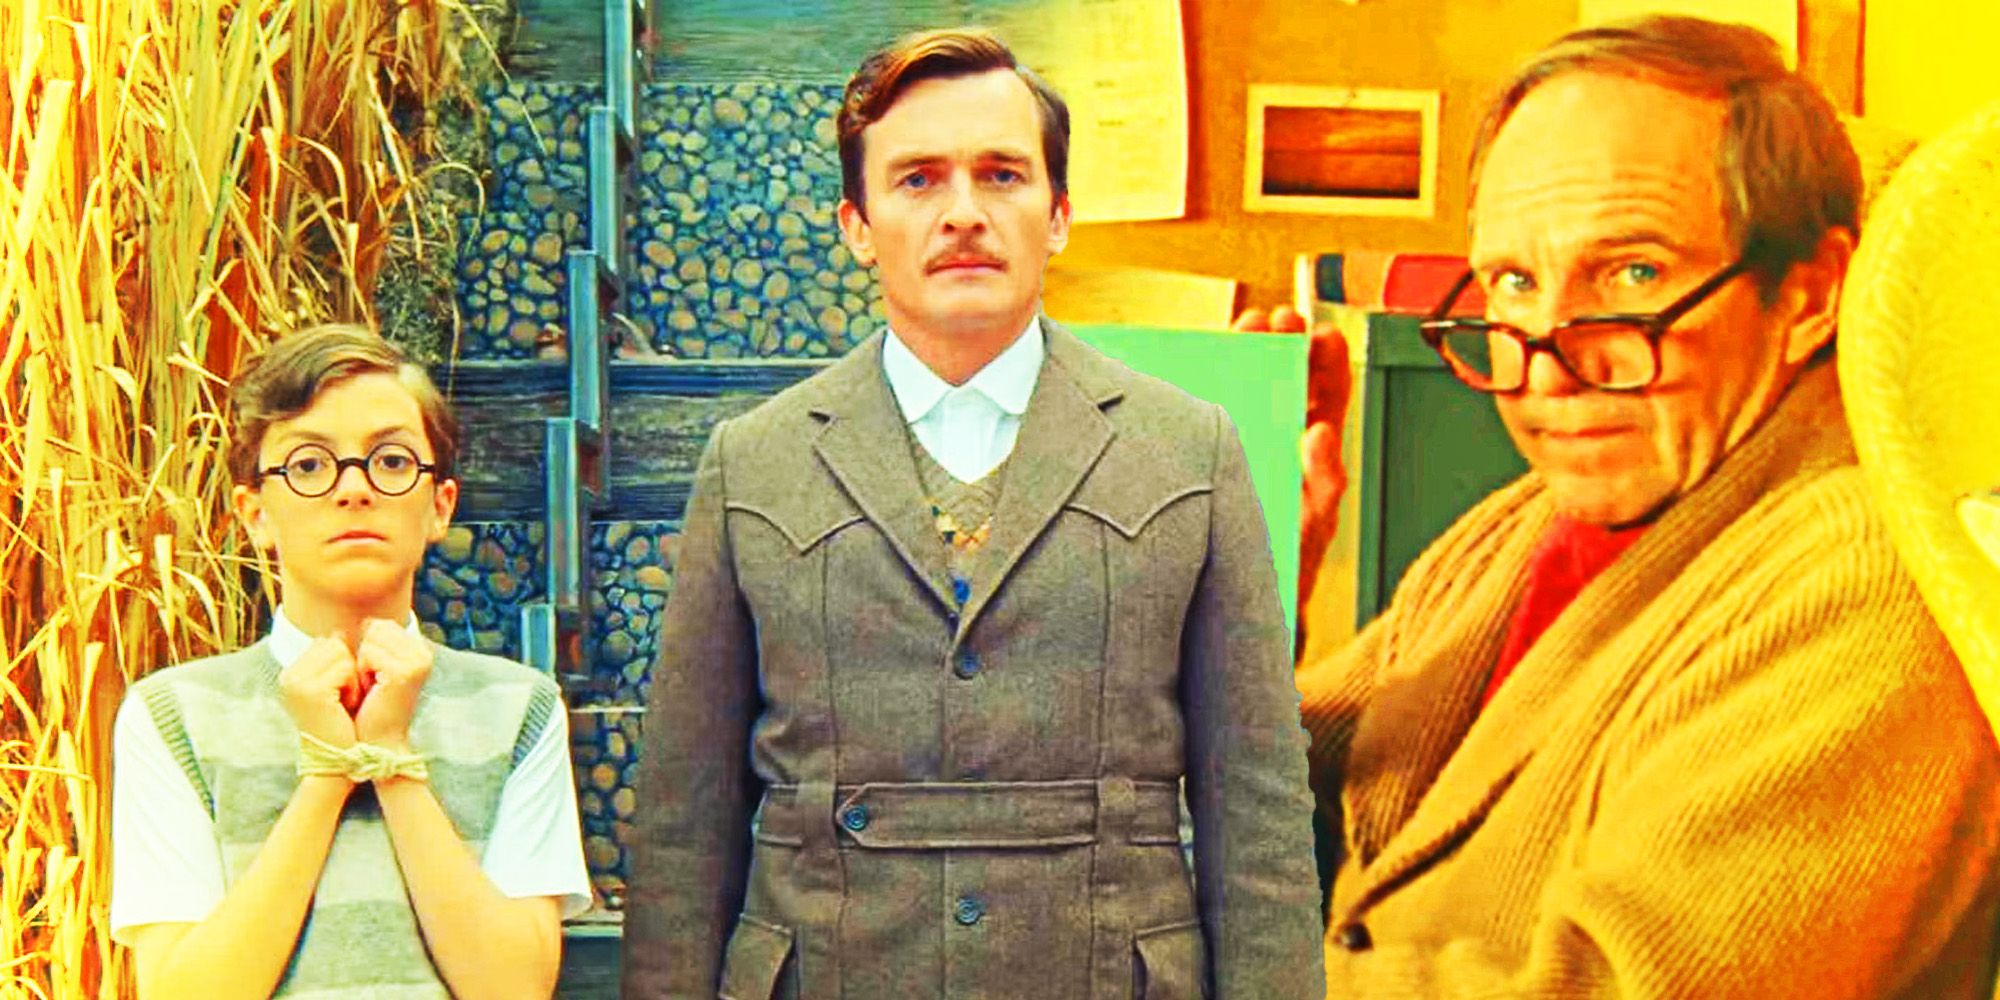 Wes Anderson's The Swan Cast & Character Guide